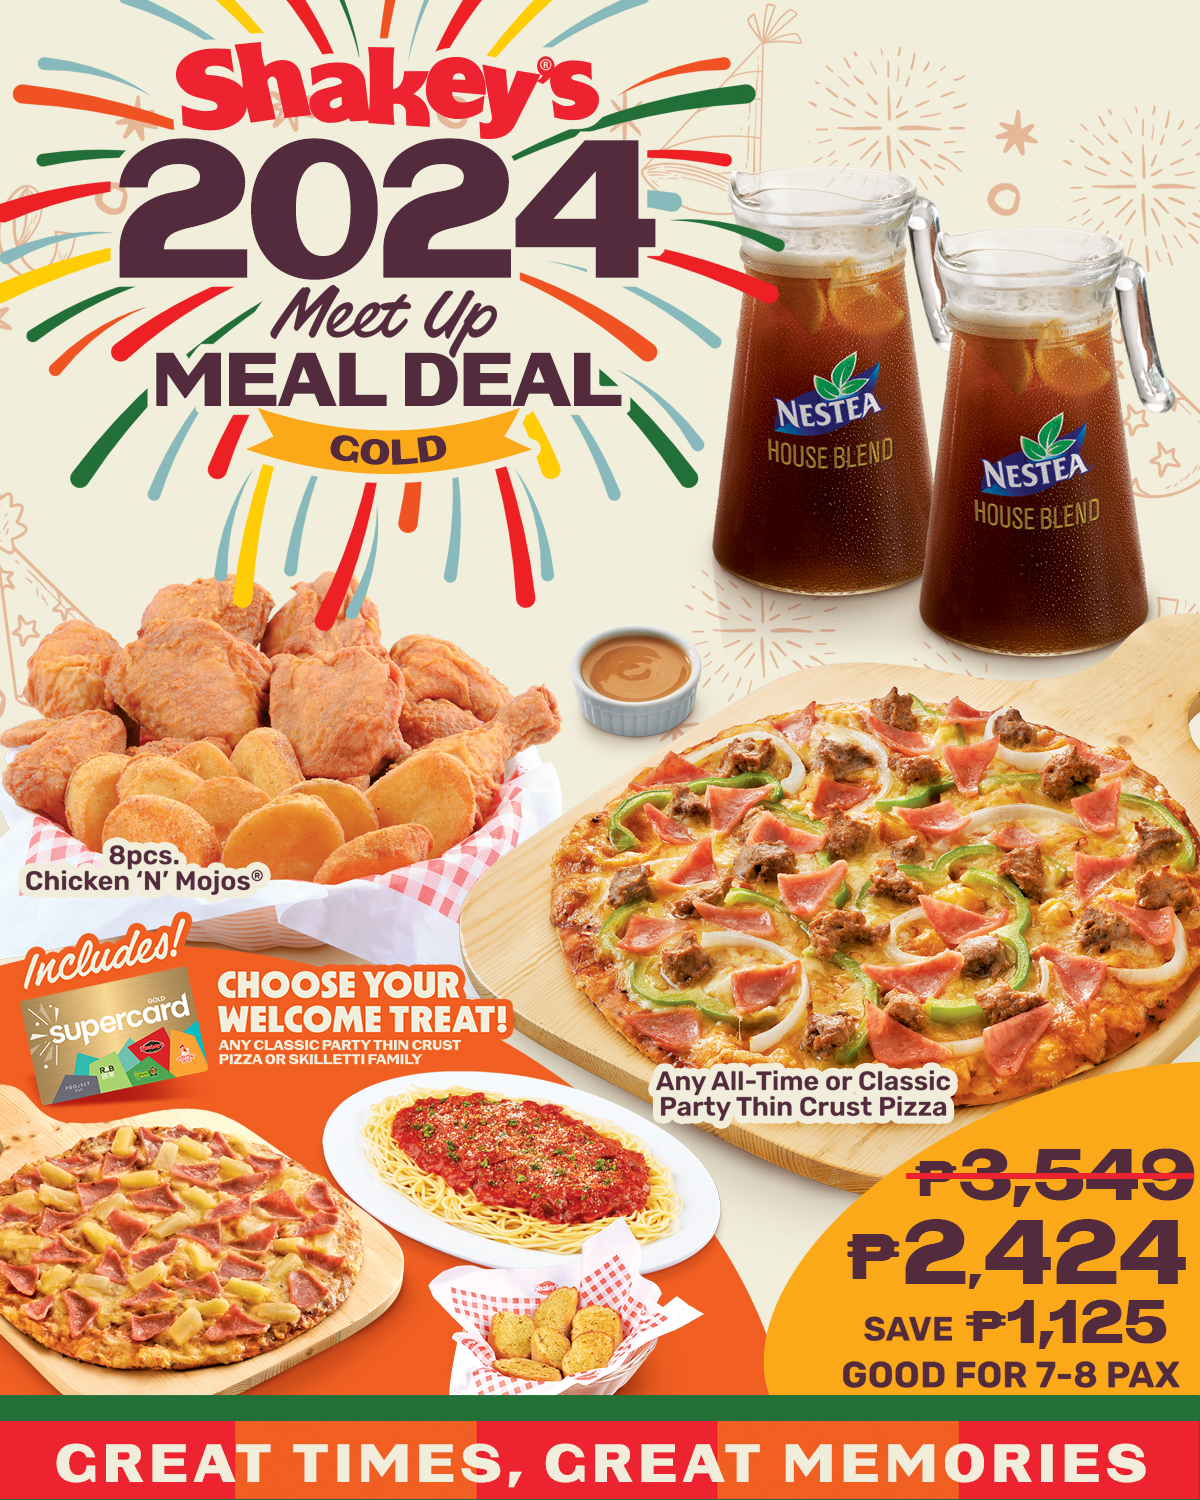 Shakey's 2024 Meet Up Meal Deal Gold